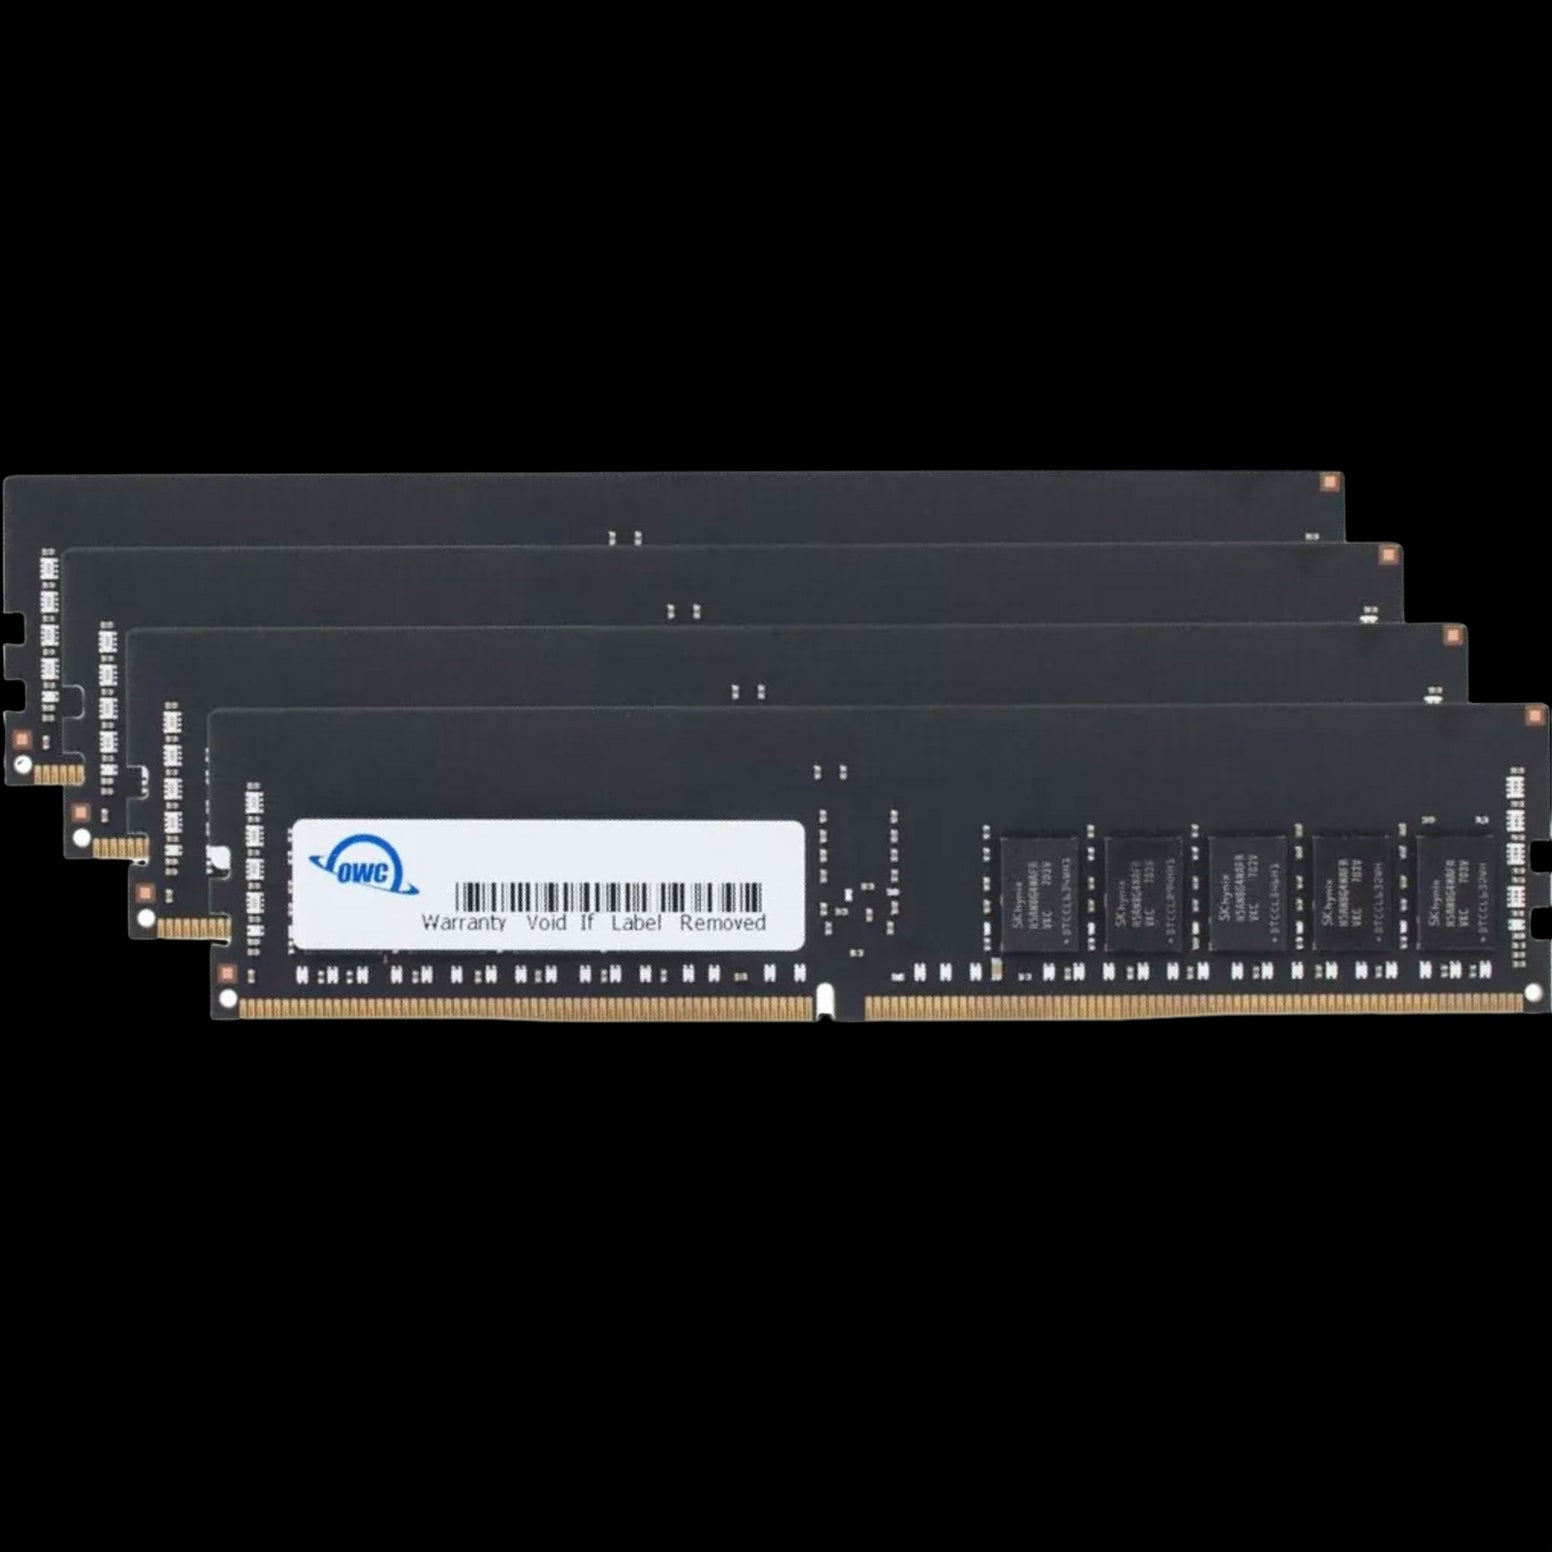 128GB OWC Matched Memory Upgrade Kit (4 x 32GB) 2666MHZ PC4-21300 DDR4 RDIMM with Adhesive Strips (for iMac Pro)